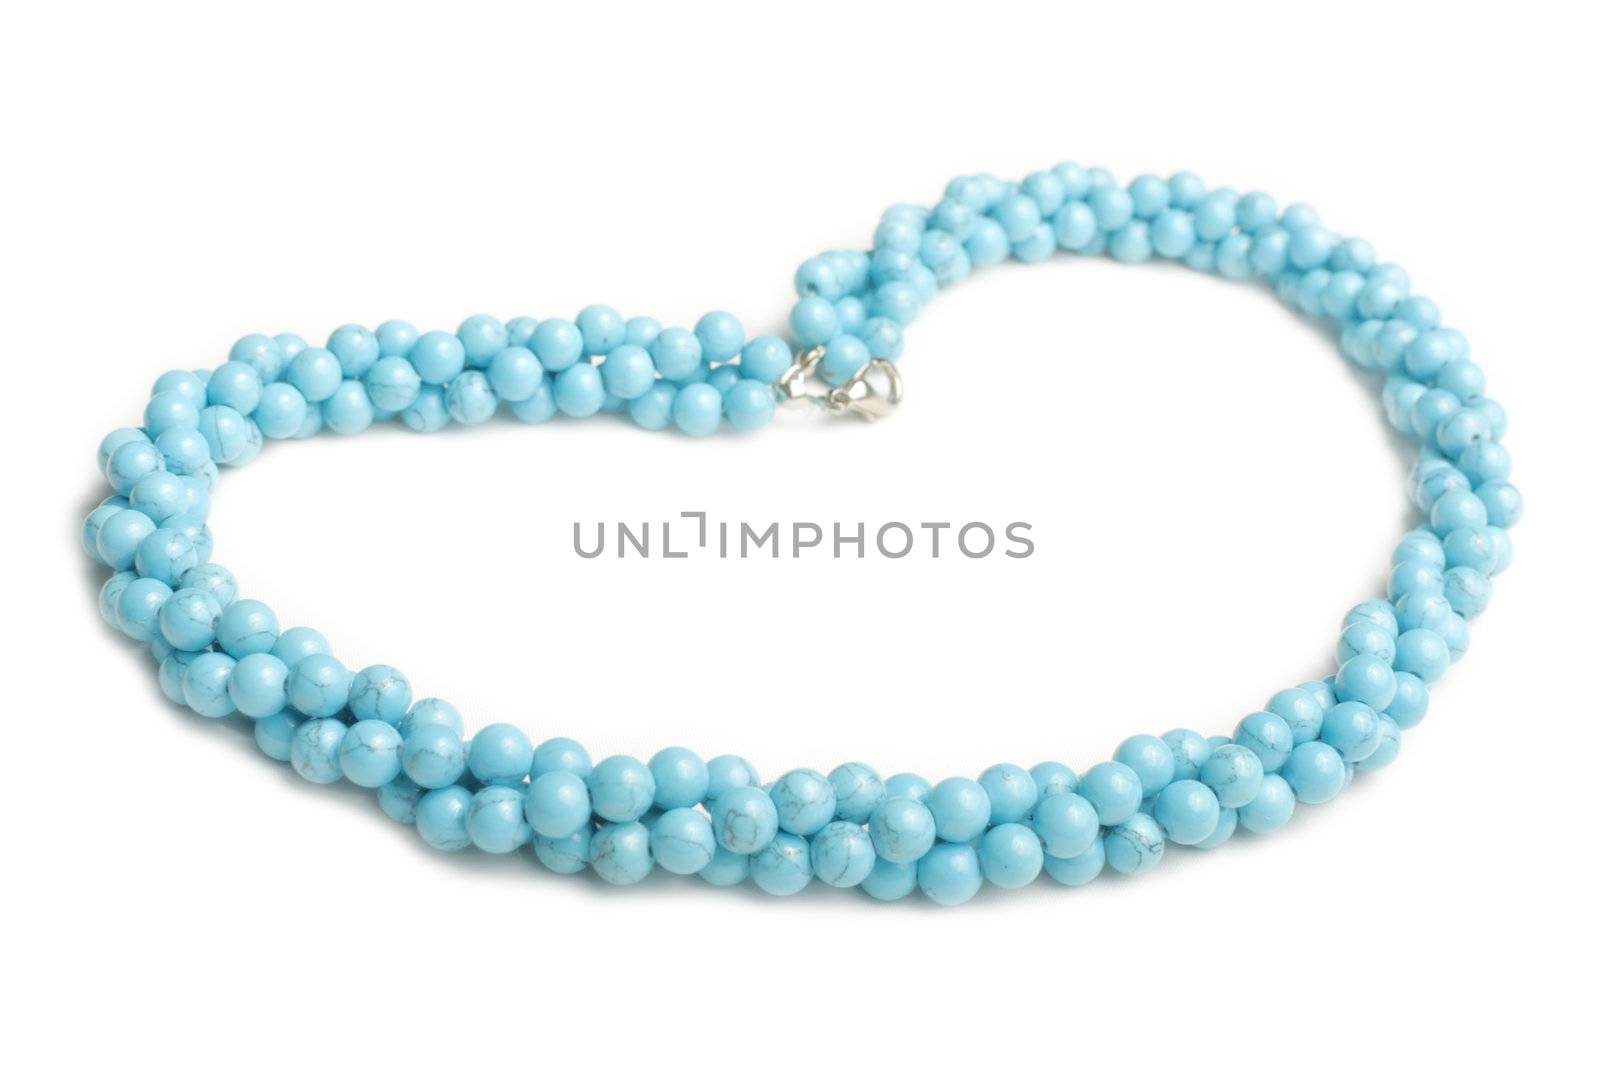 Blue lazurite necklace made from balls isolated on white background